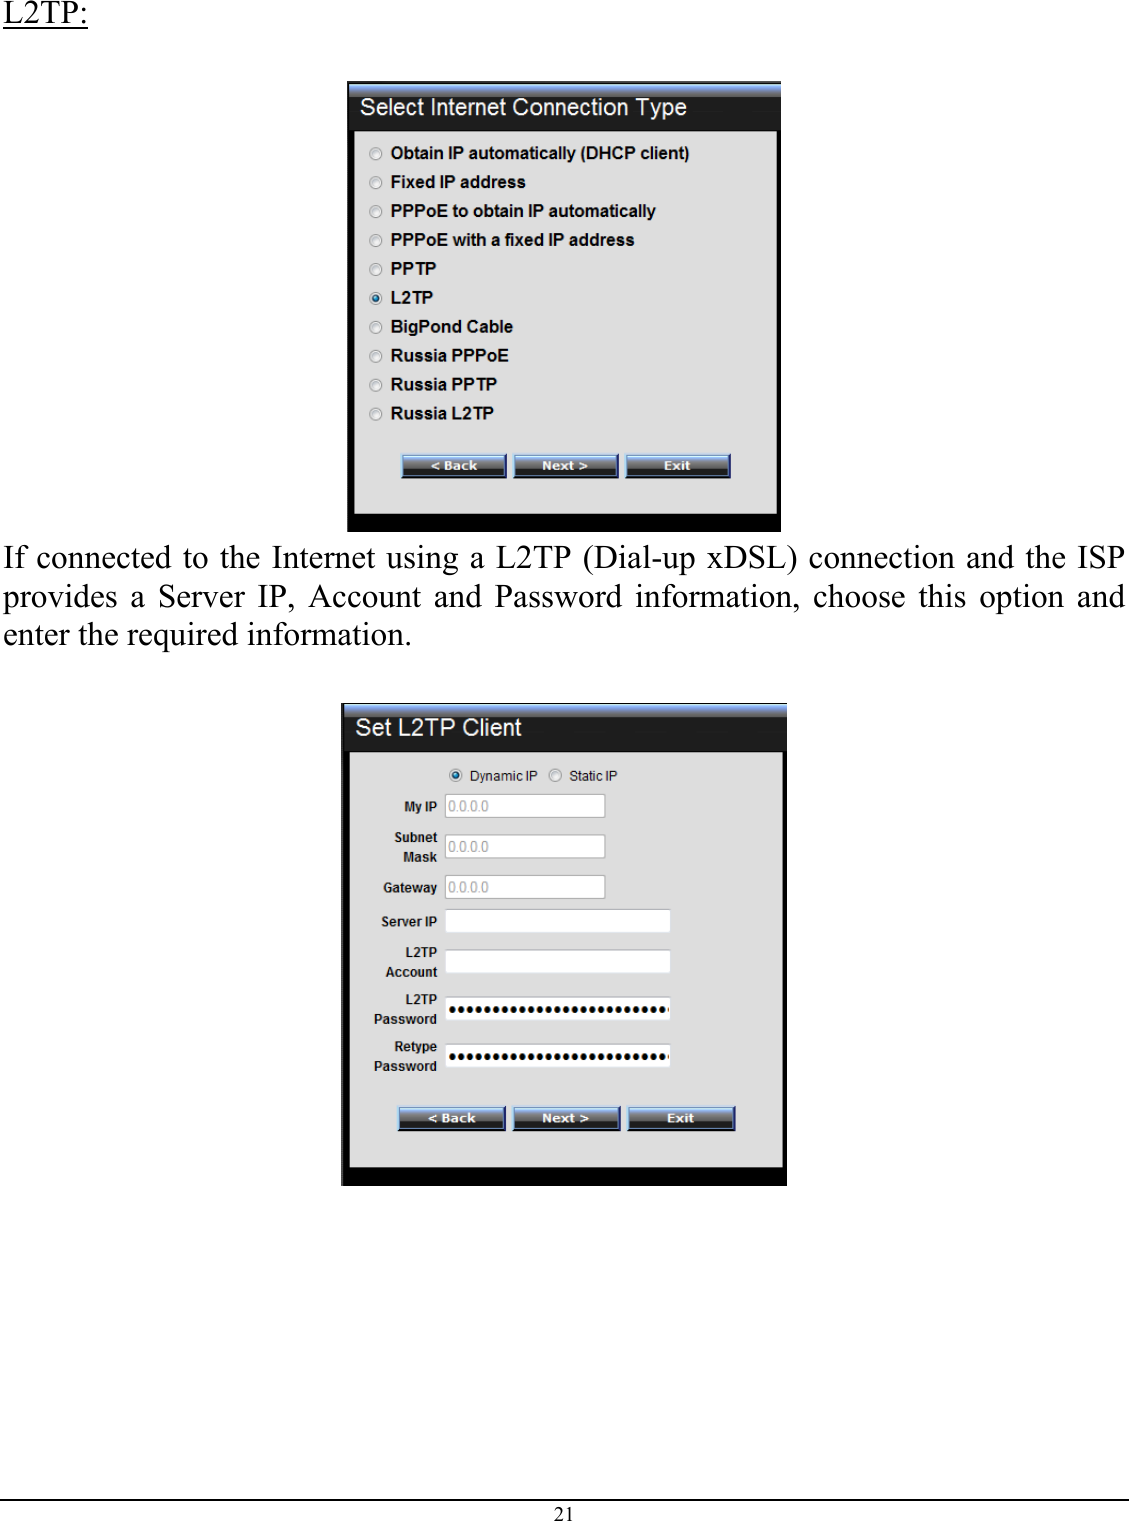 21  L2TP:   If connected to the Internet using a L2TP (Dial-up xDSL) connection and the ISP provides a Server IP, Account and Password information, choose this option and enter the required information.   